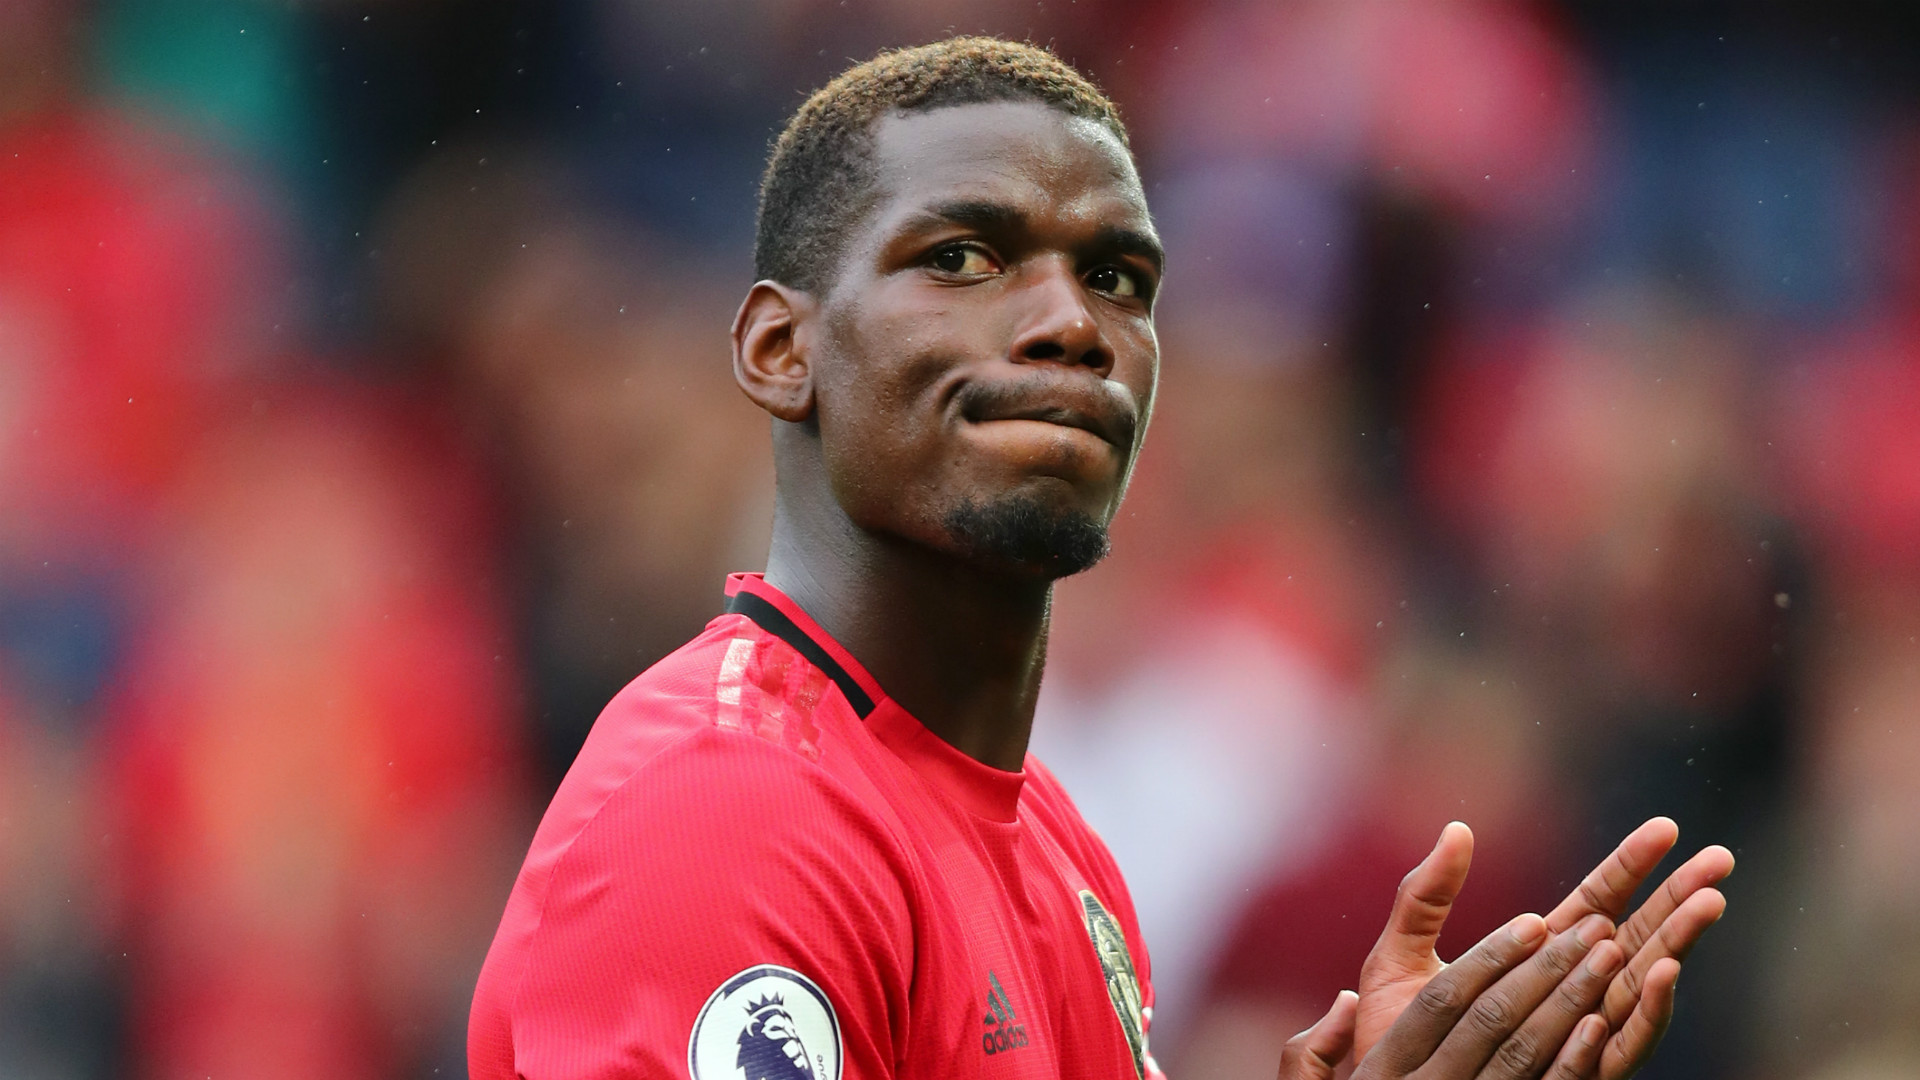 ‘Pogba can have positive impact for Man Utd’ – O’Shea looking forward to seeing ‘decent fella’ back